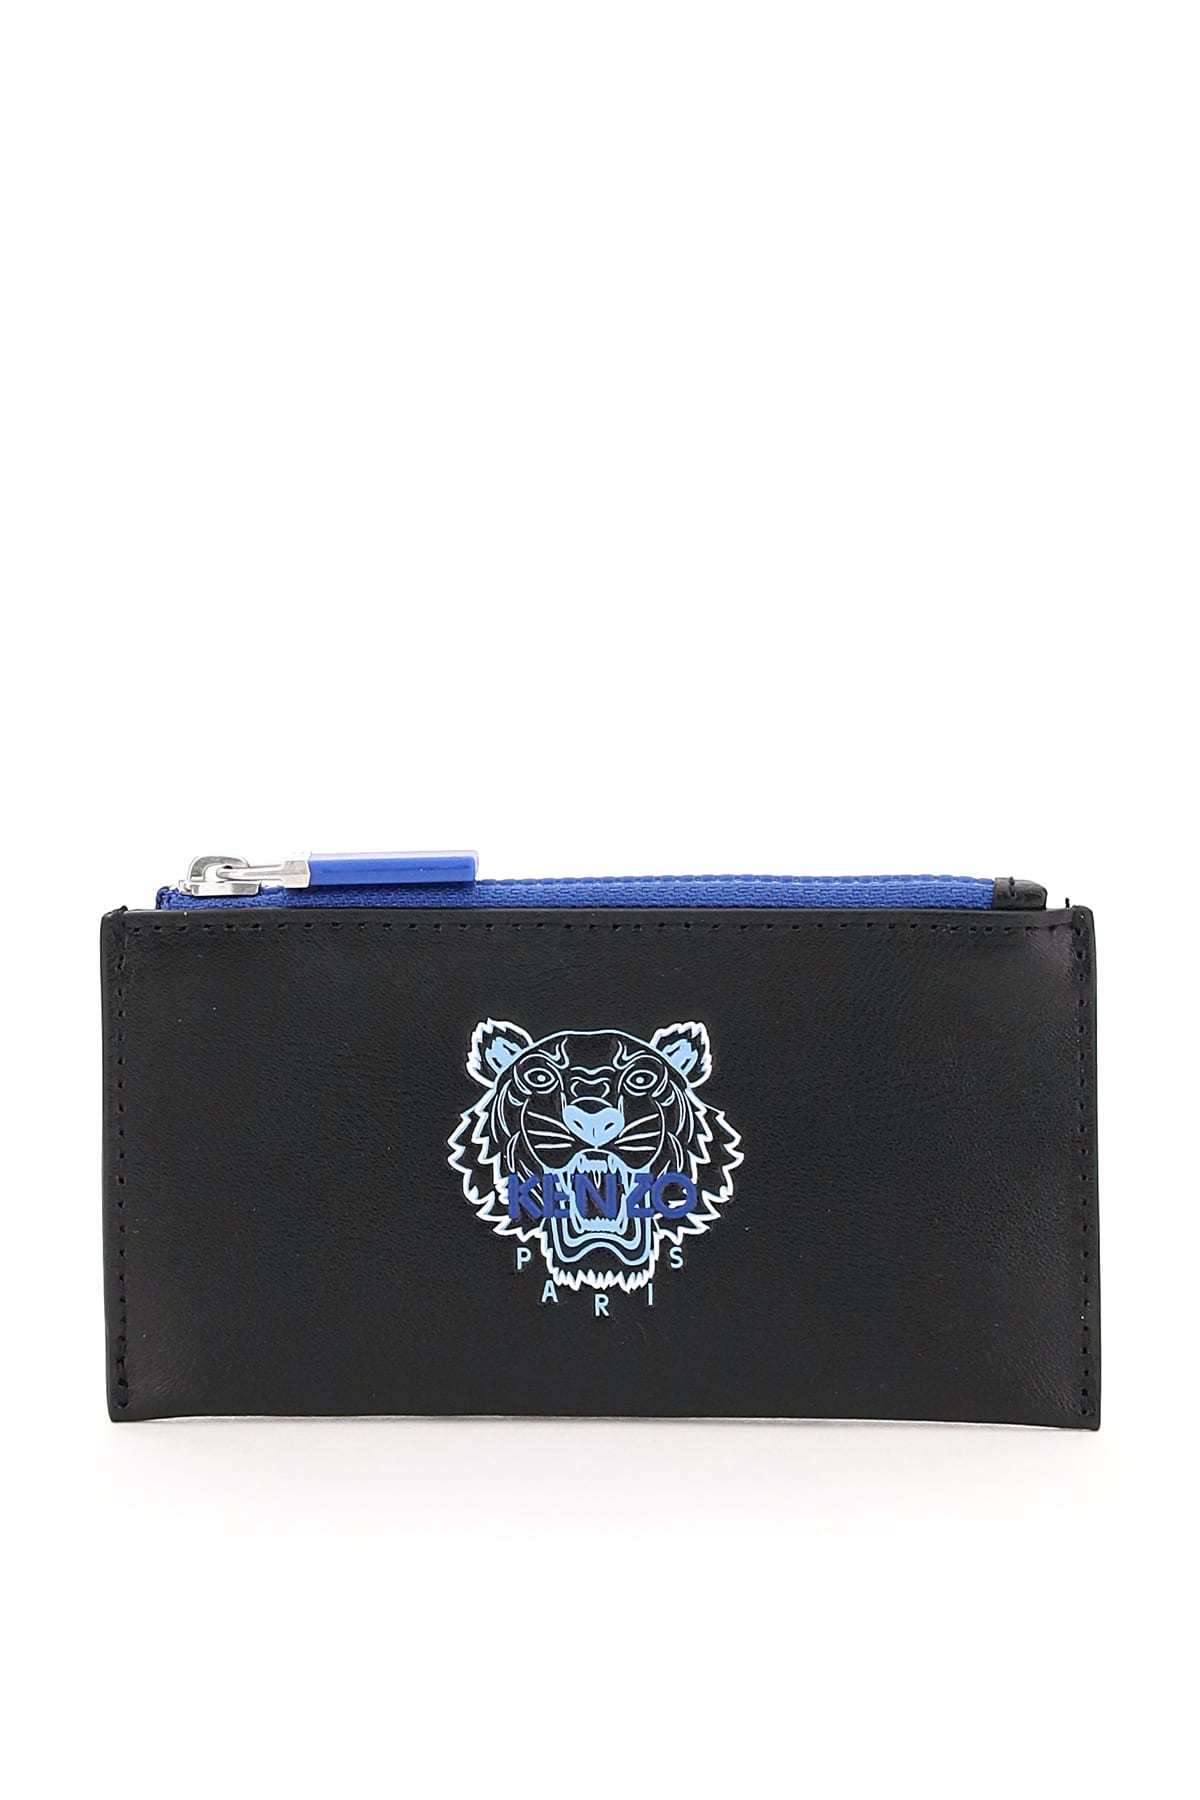 Kenzo Zipped Card Holder Pouch Tiger Print